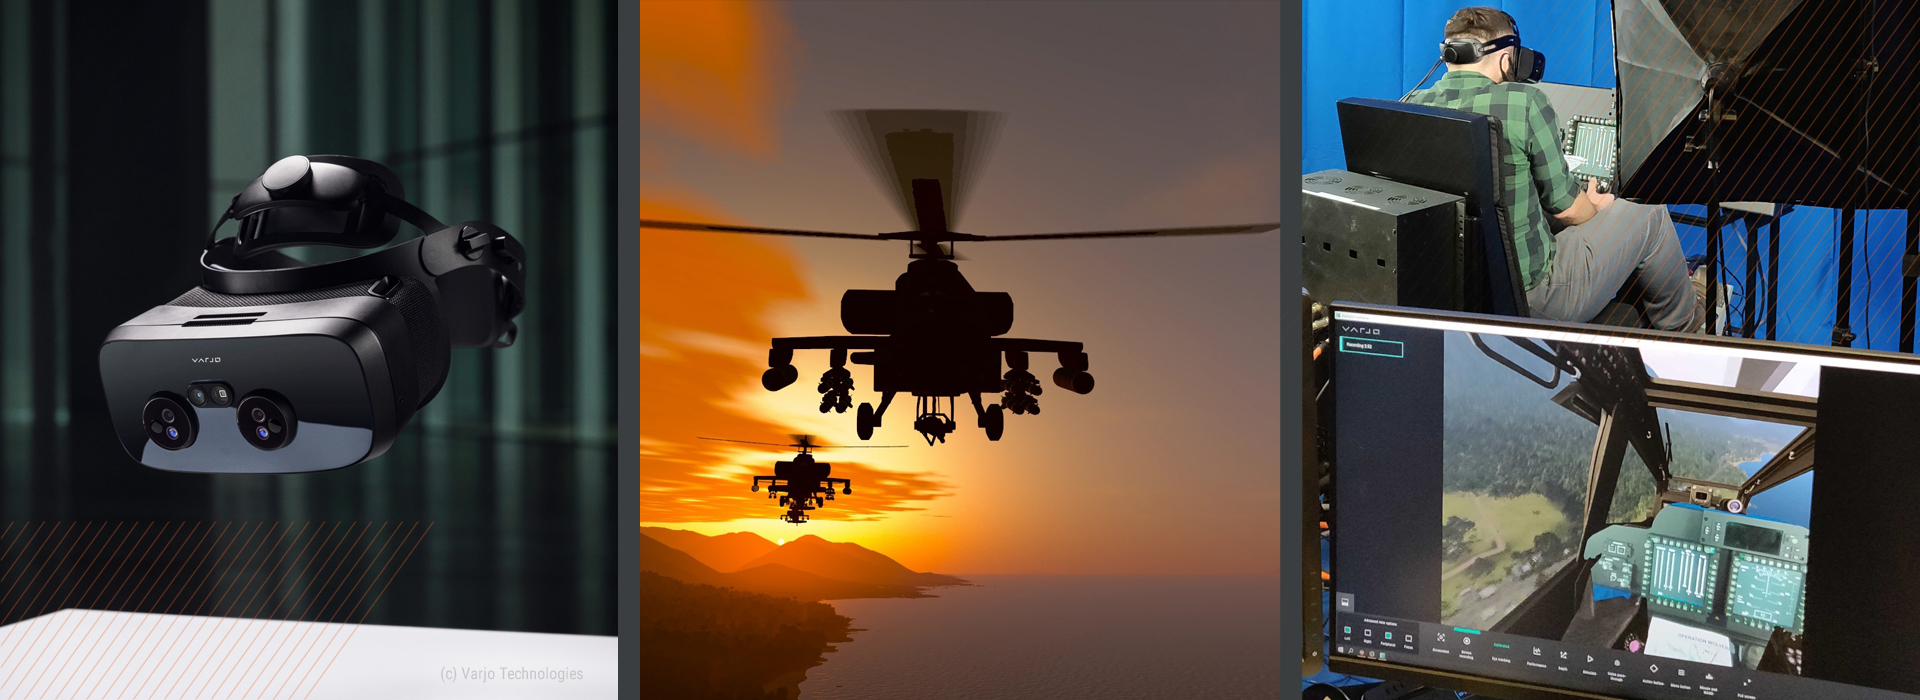 bohemia_interactive_simulations_among_first_adopters_leveraging_varjos_xr_3_to_demonstrate_a_mixed_reality_flight_training_solution_